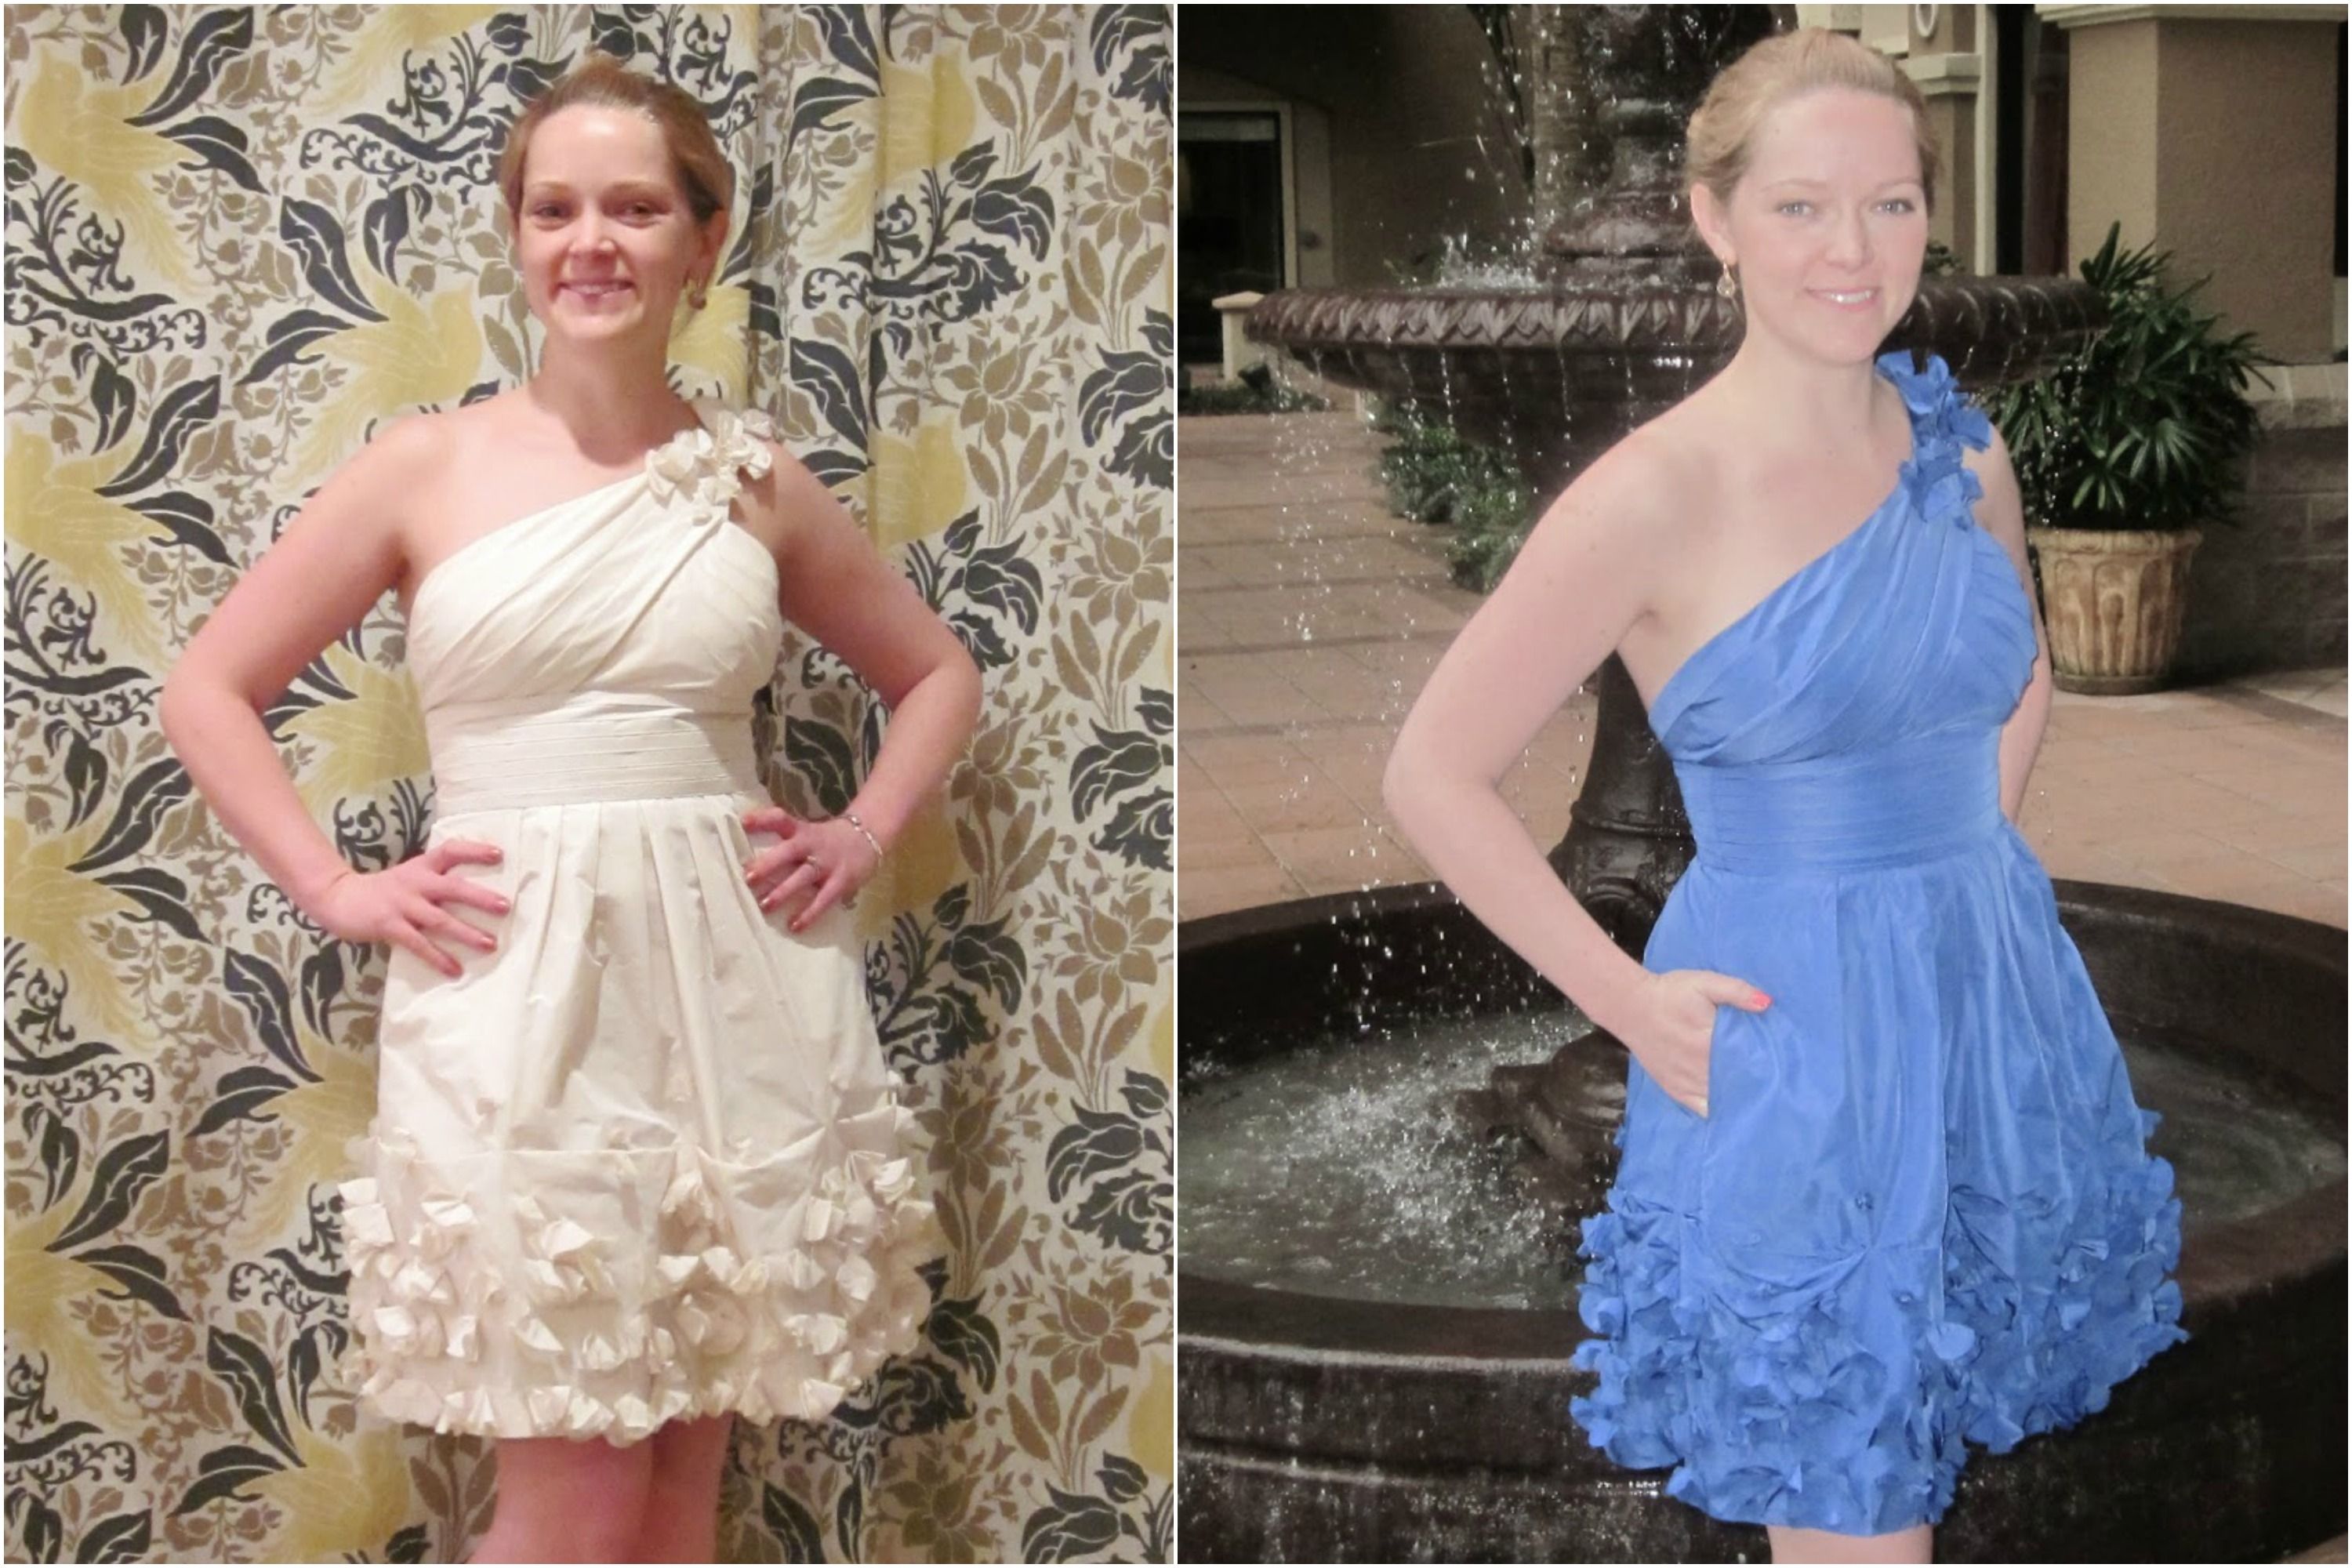 9 Wedding Dress Transformations That Are Seriously Incredible